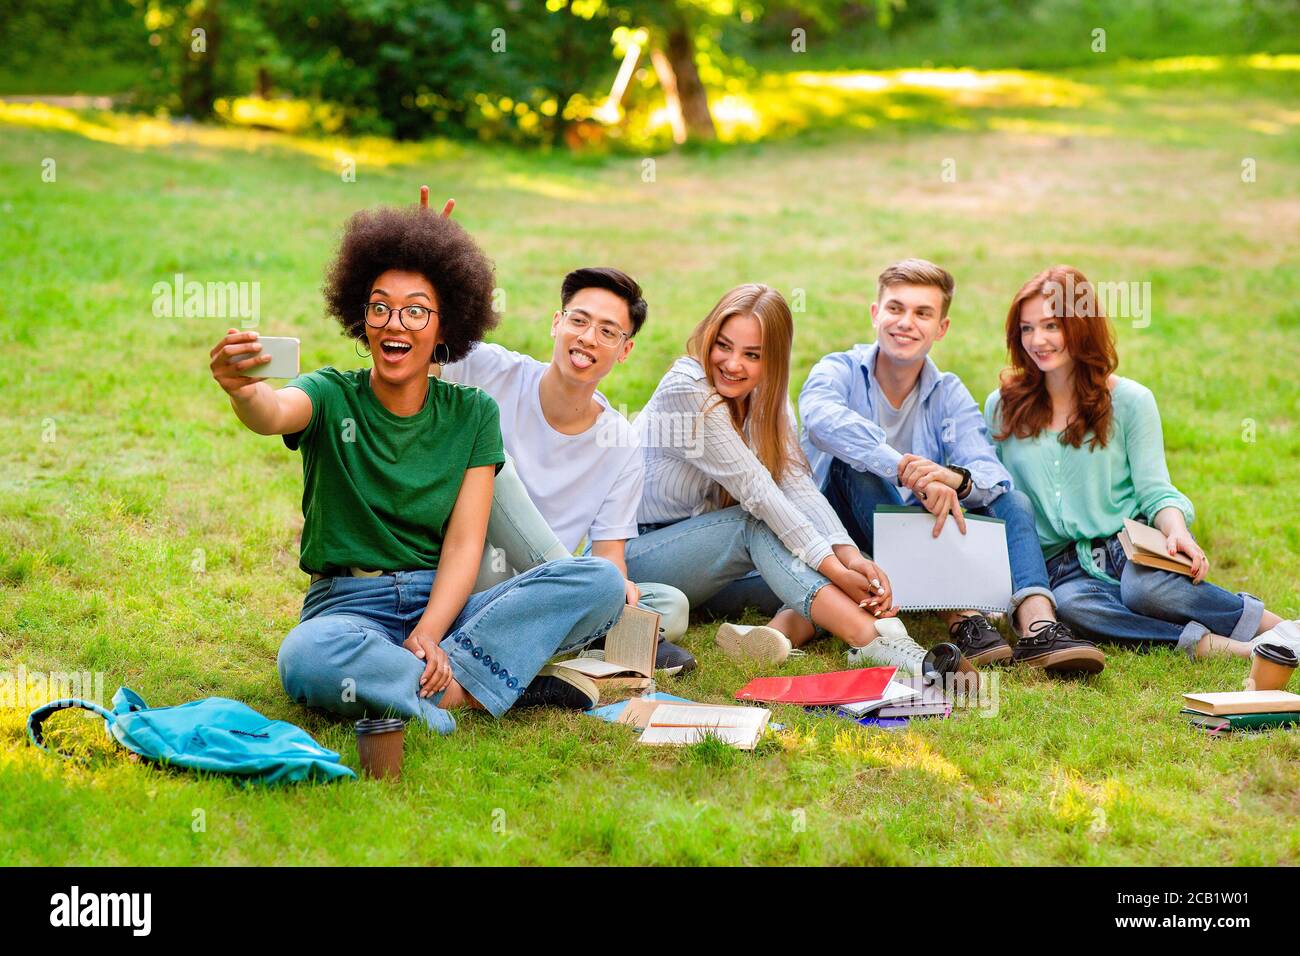 Happy Multicultural College Students Having Fun While Taking Group Selfie Outdoors Stock Photo